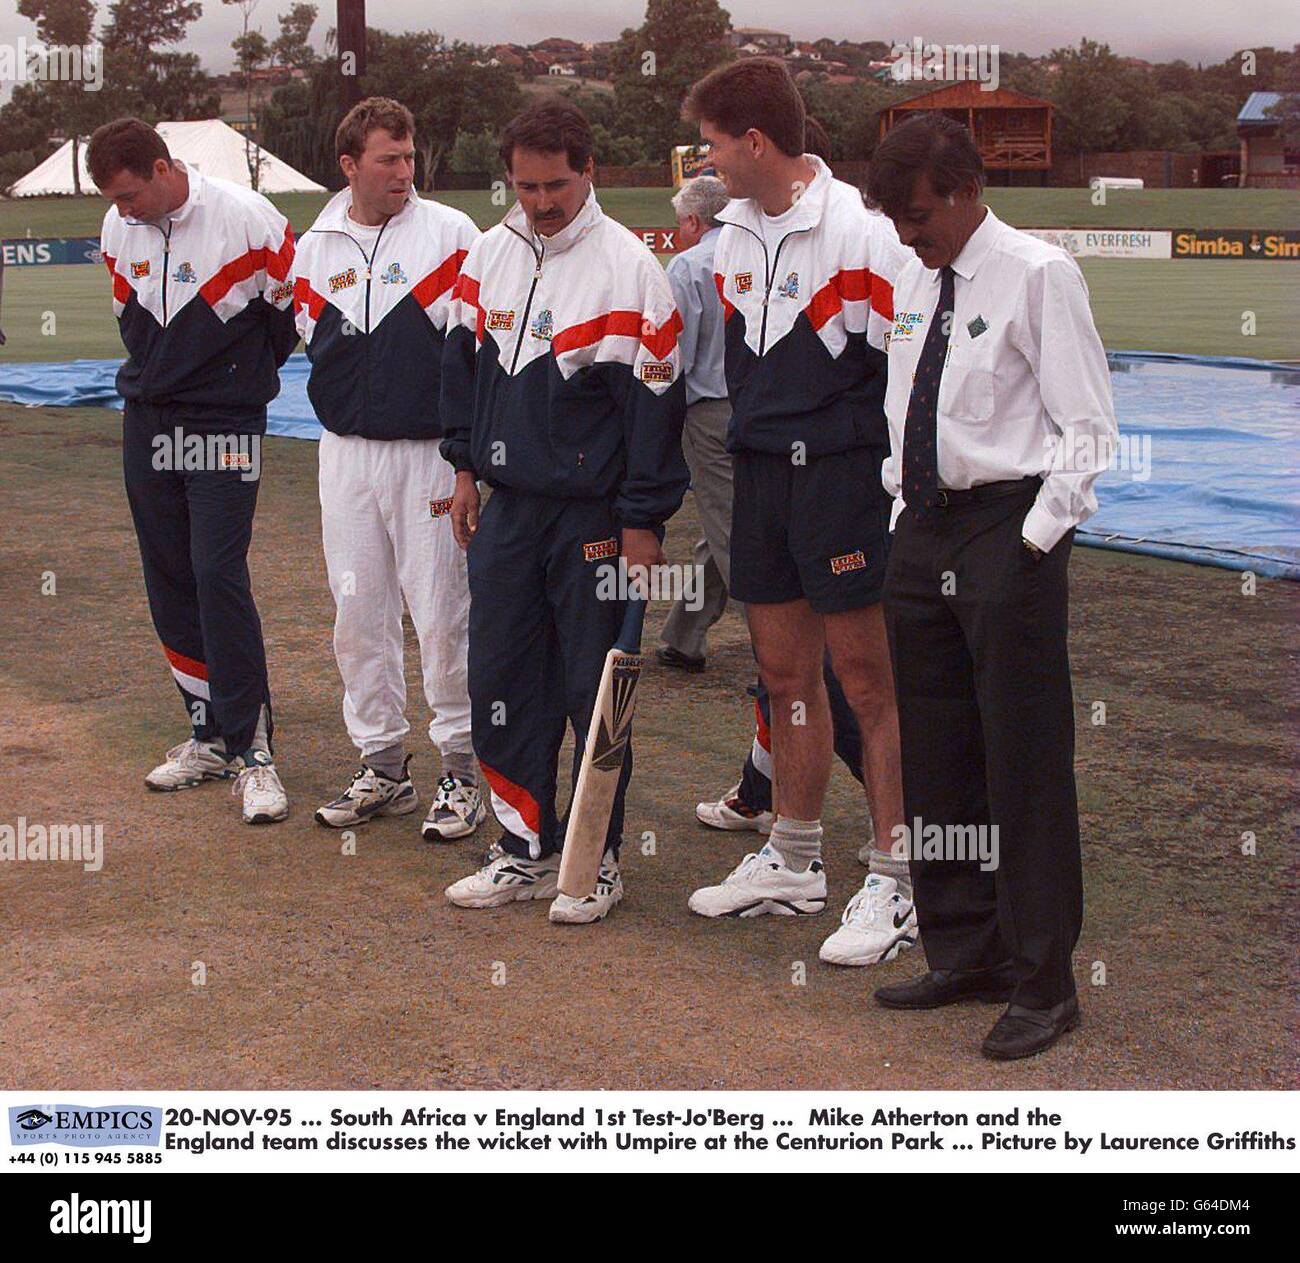 20-NOV-95. South Africa v England 1st Test-Jo'Berg. Mike Atherton and the England team discusses the wicket with Umpire at the Centurion Park. Picture by Laurence Griffiths Stock Photo